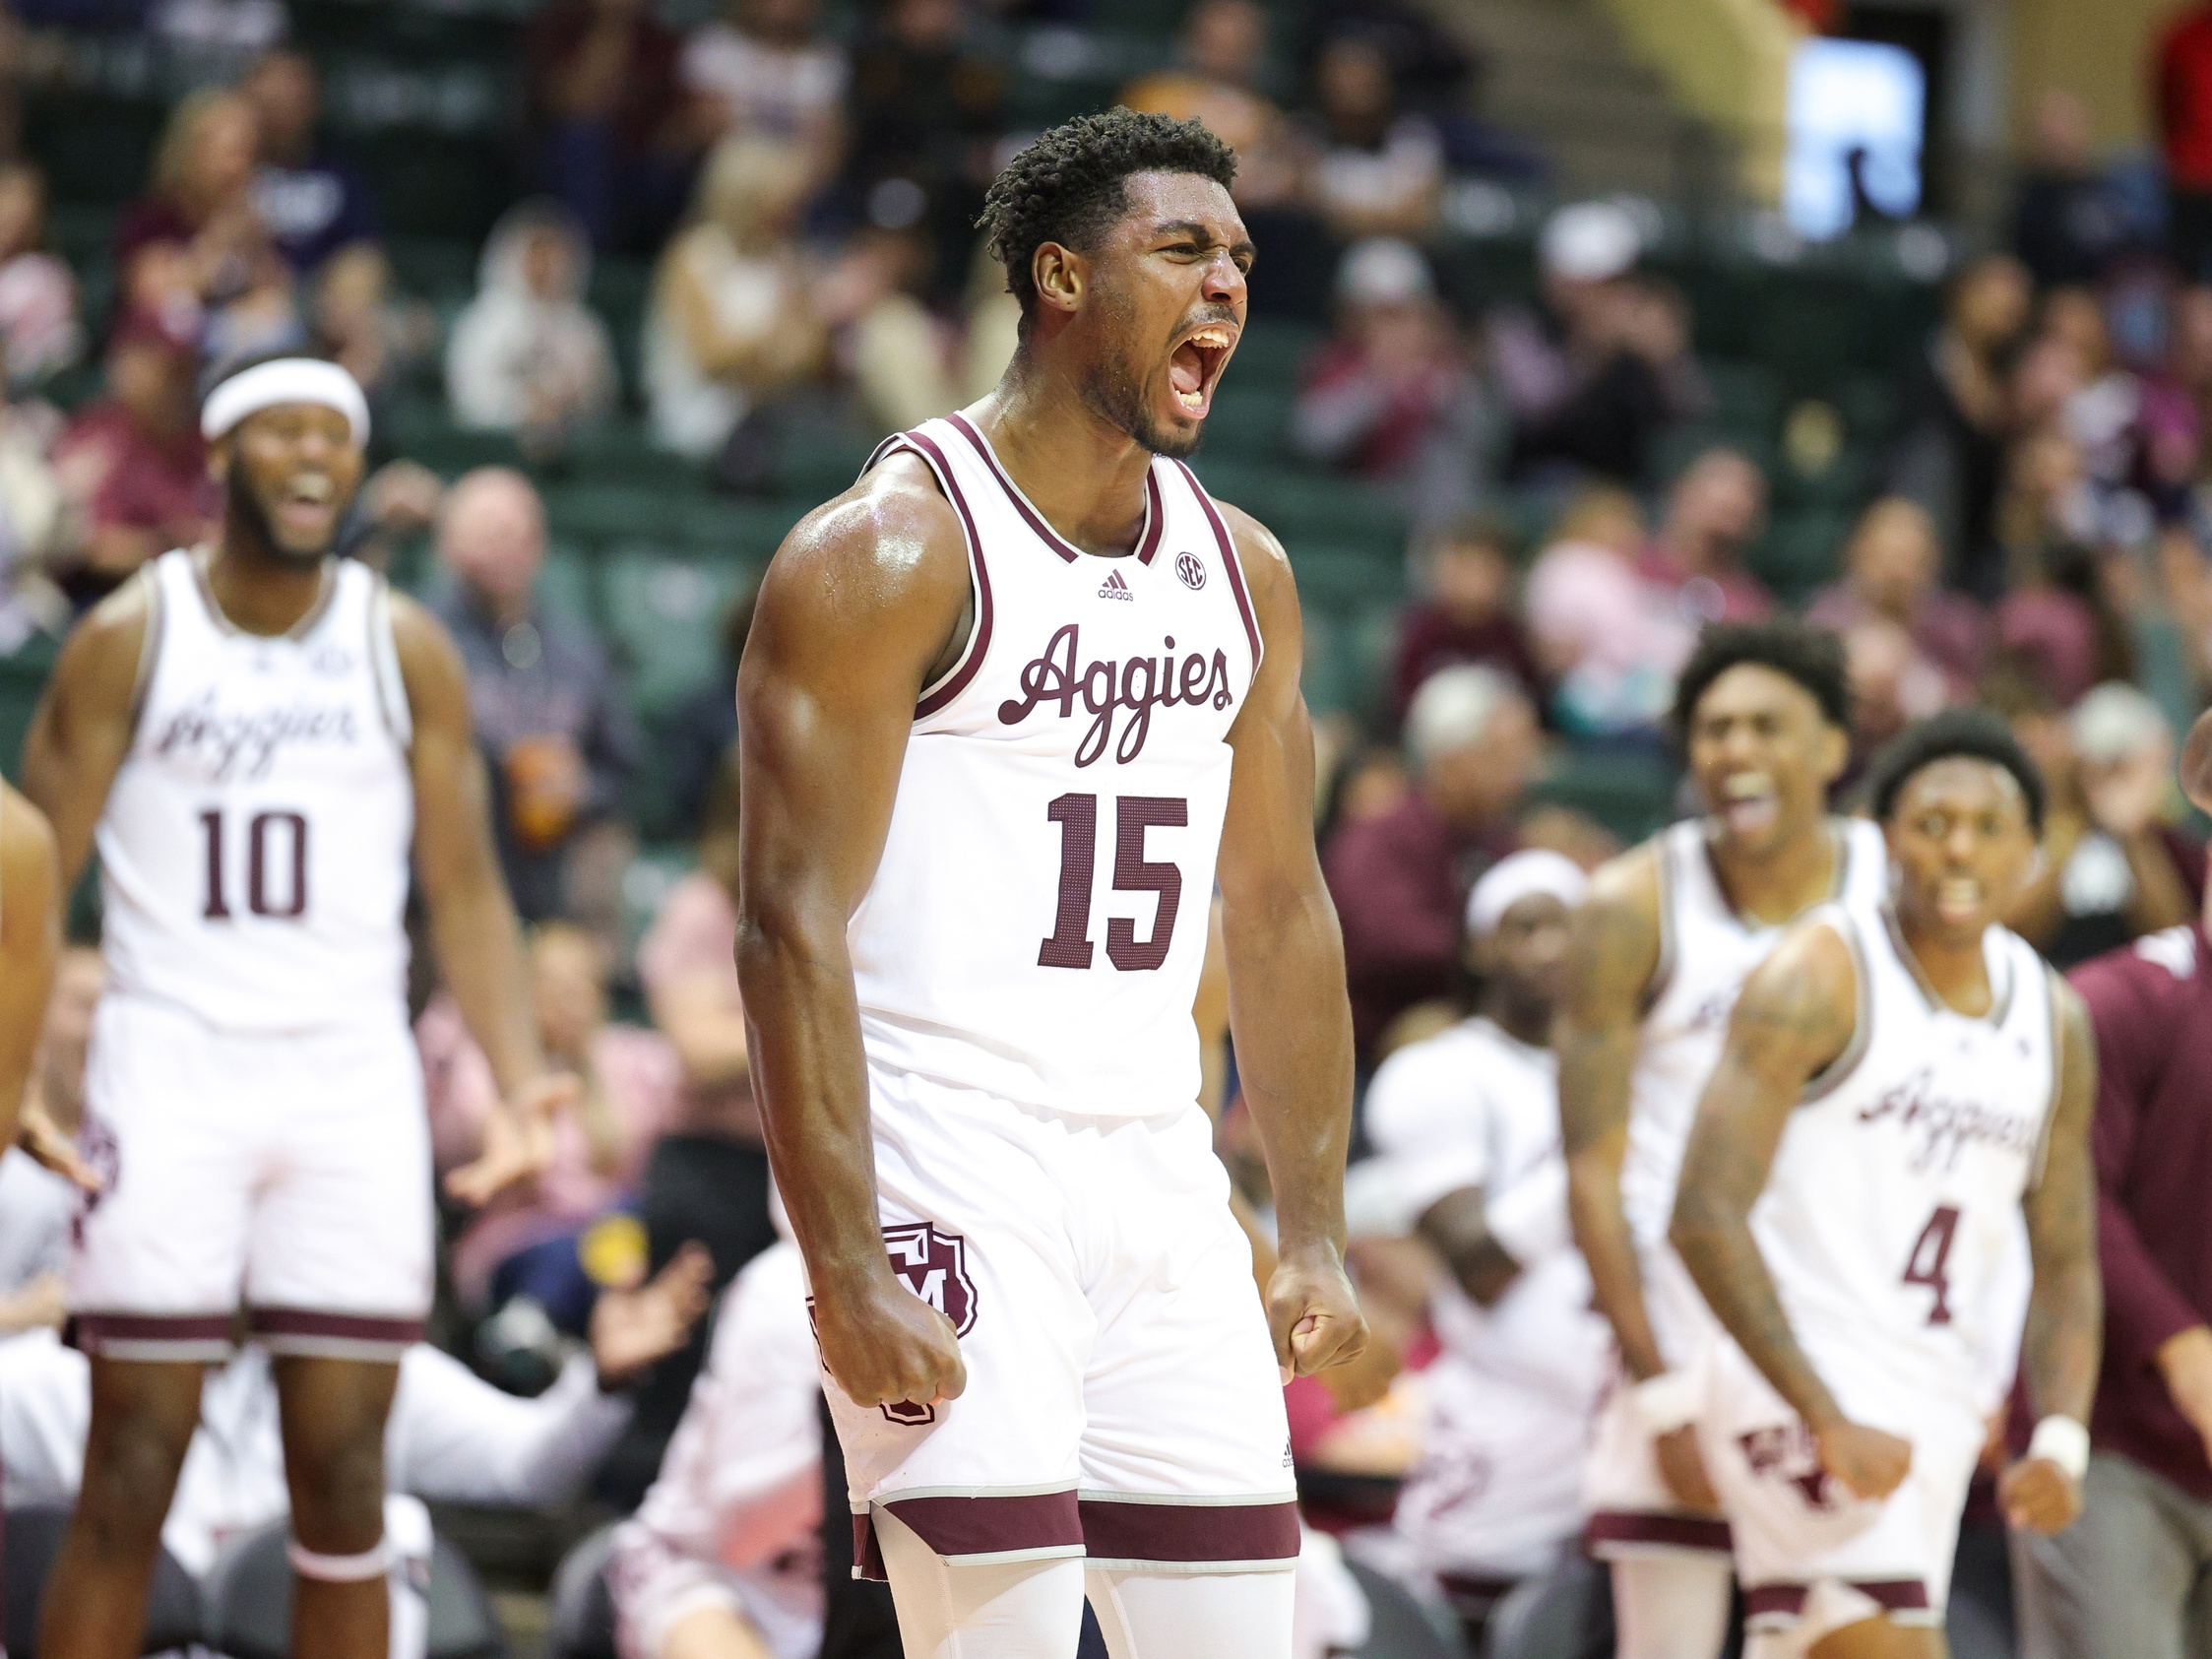 exas A&M Aggies forward Henry Coleman III (15) reacts after a play against the Penn State Nittany Lions in the first half during the ESPN Events Invitational at State Farm Field House.